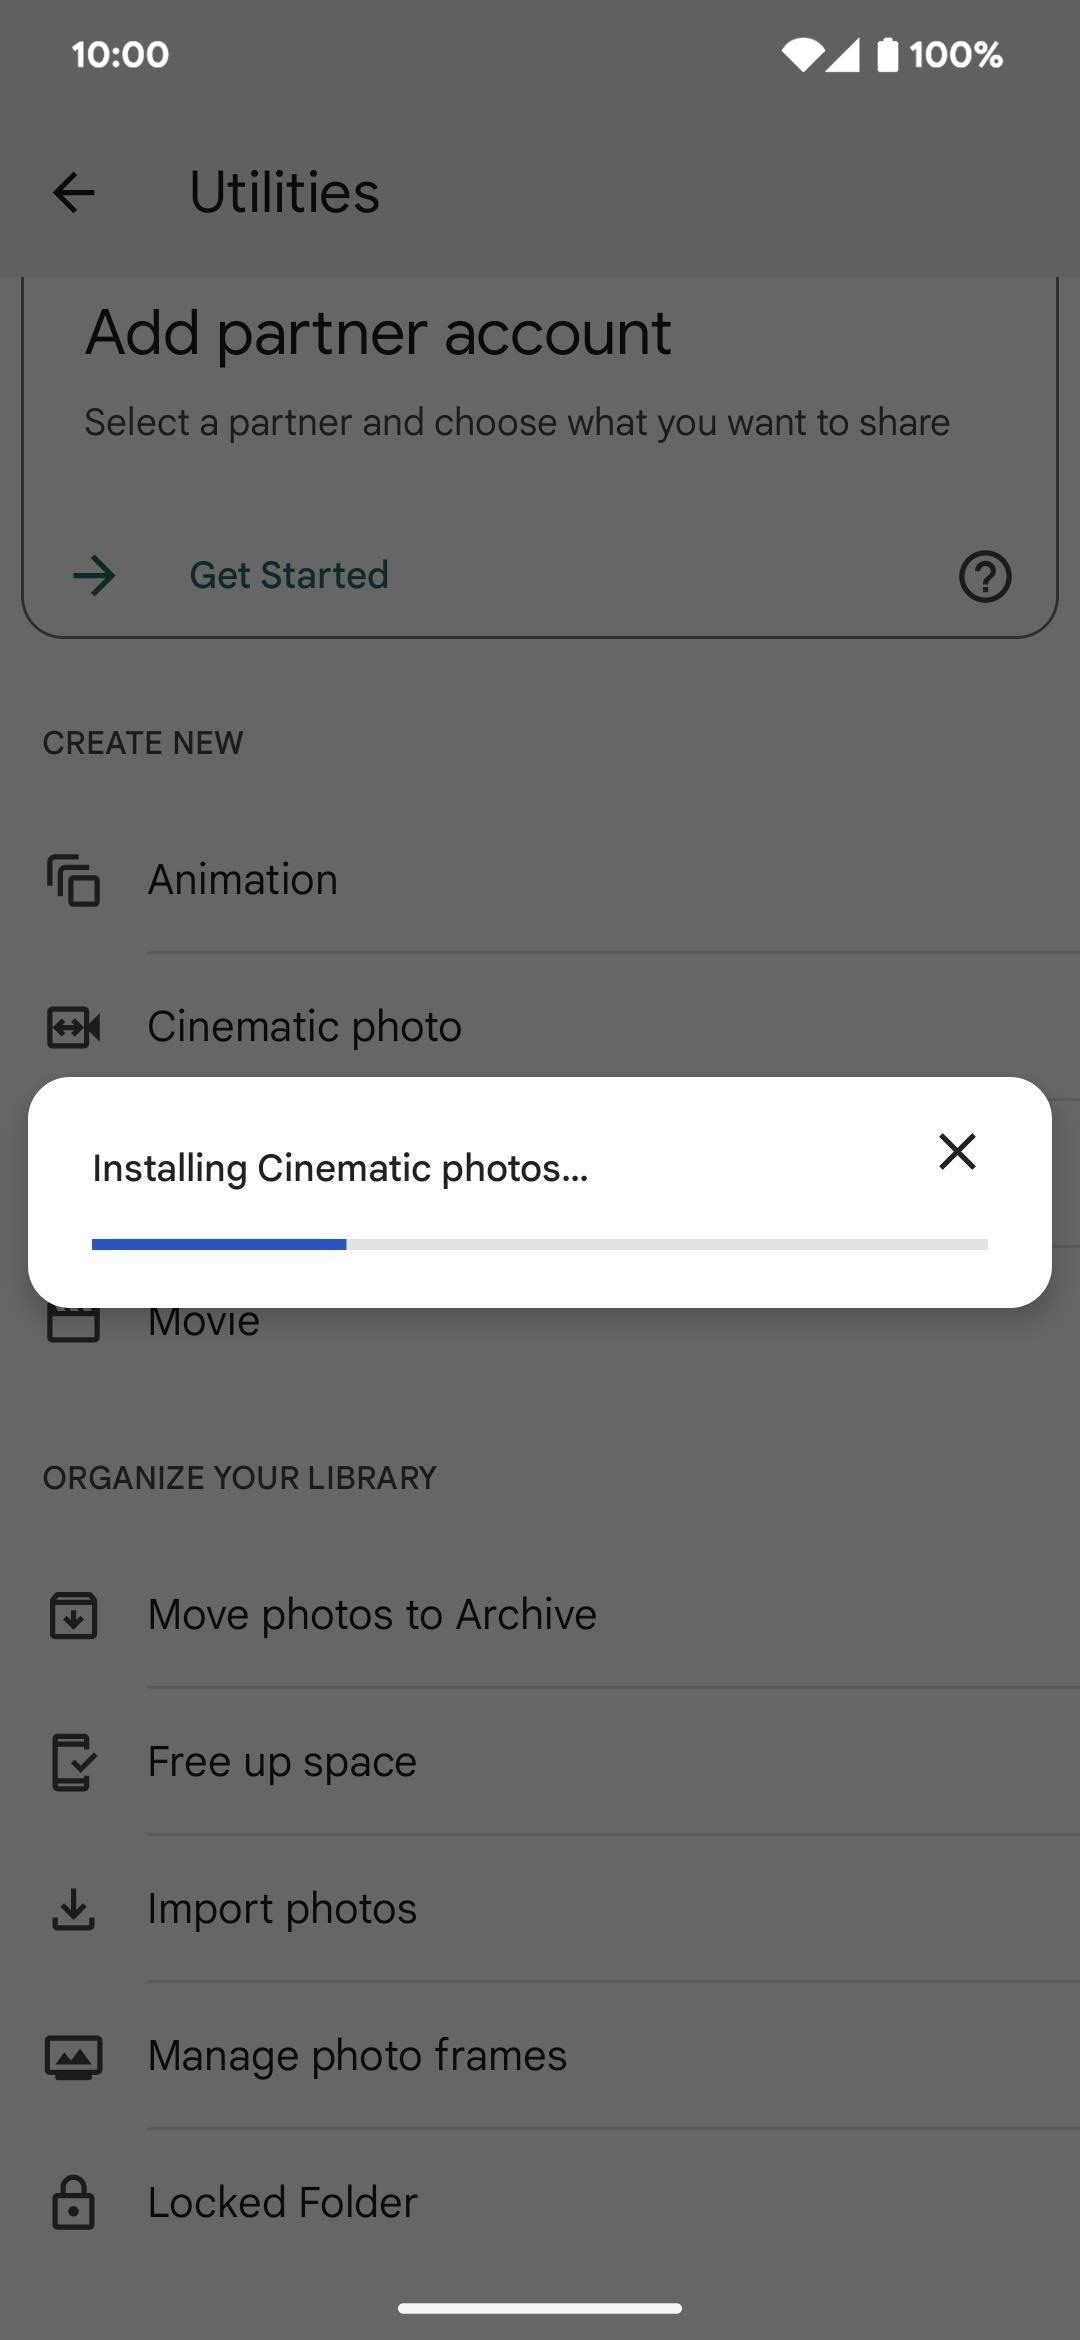 Create a 3D Cinematic Photo in Google Photos from Any Image in Your Library